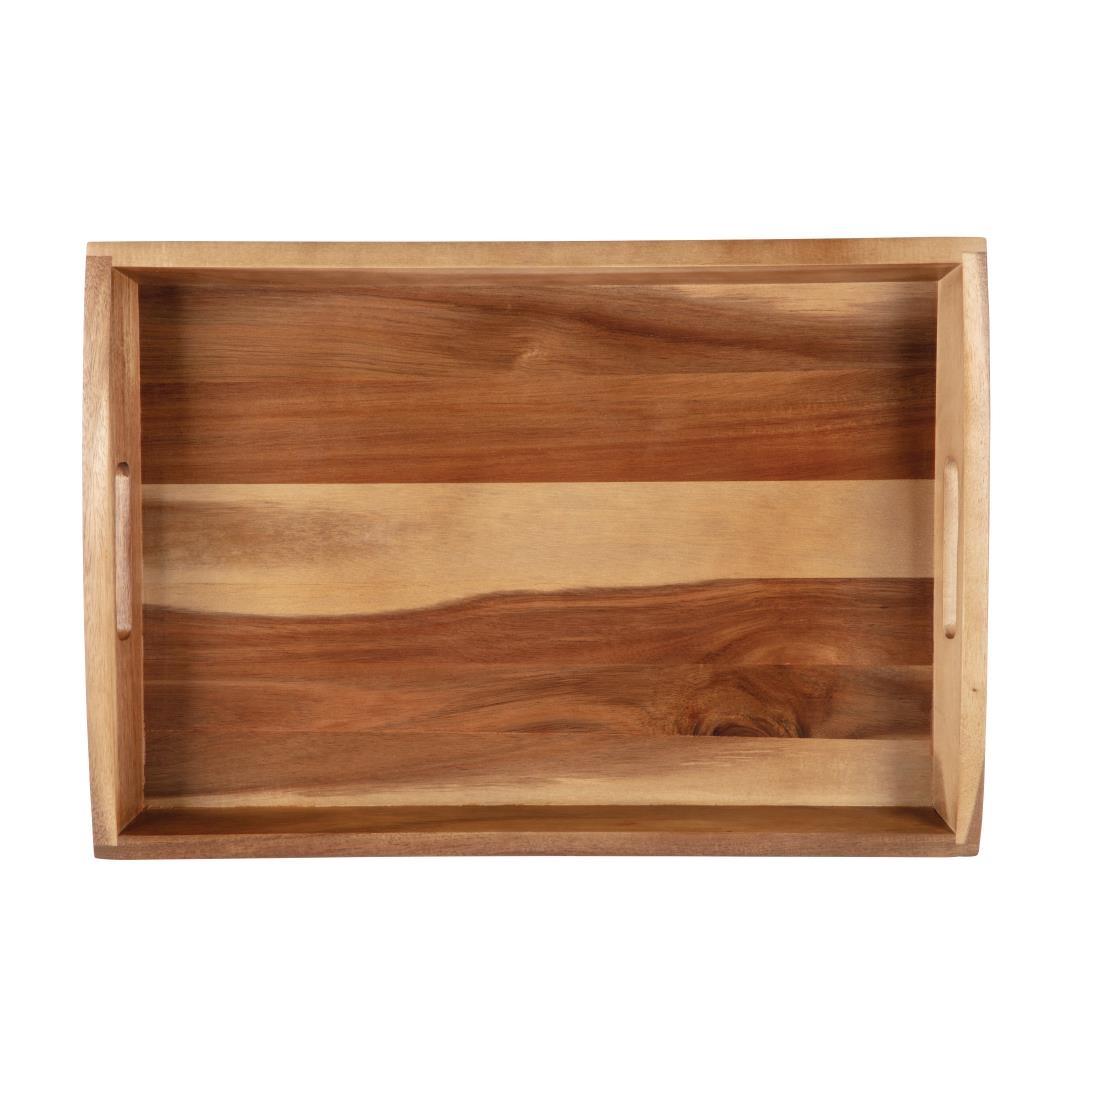 Olympia Large Acacia Wood Butler Tray 510mm - GM266  - 2